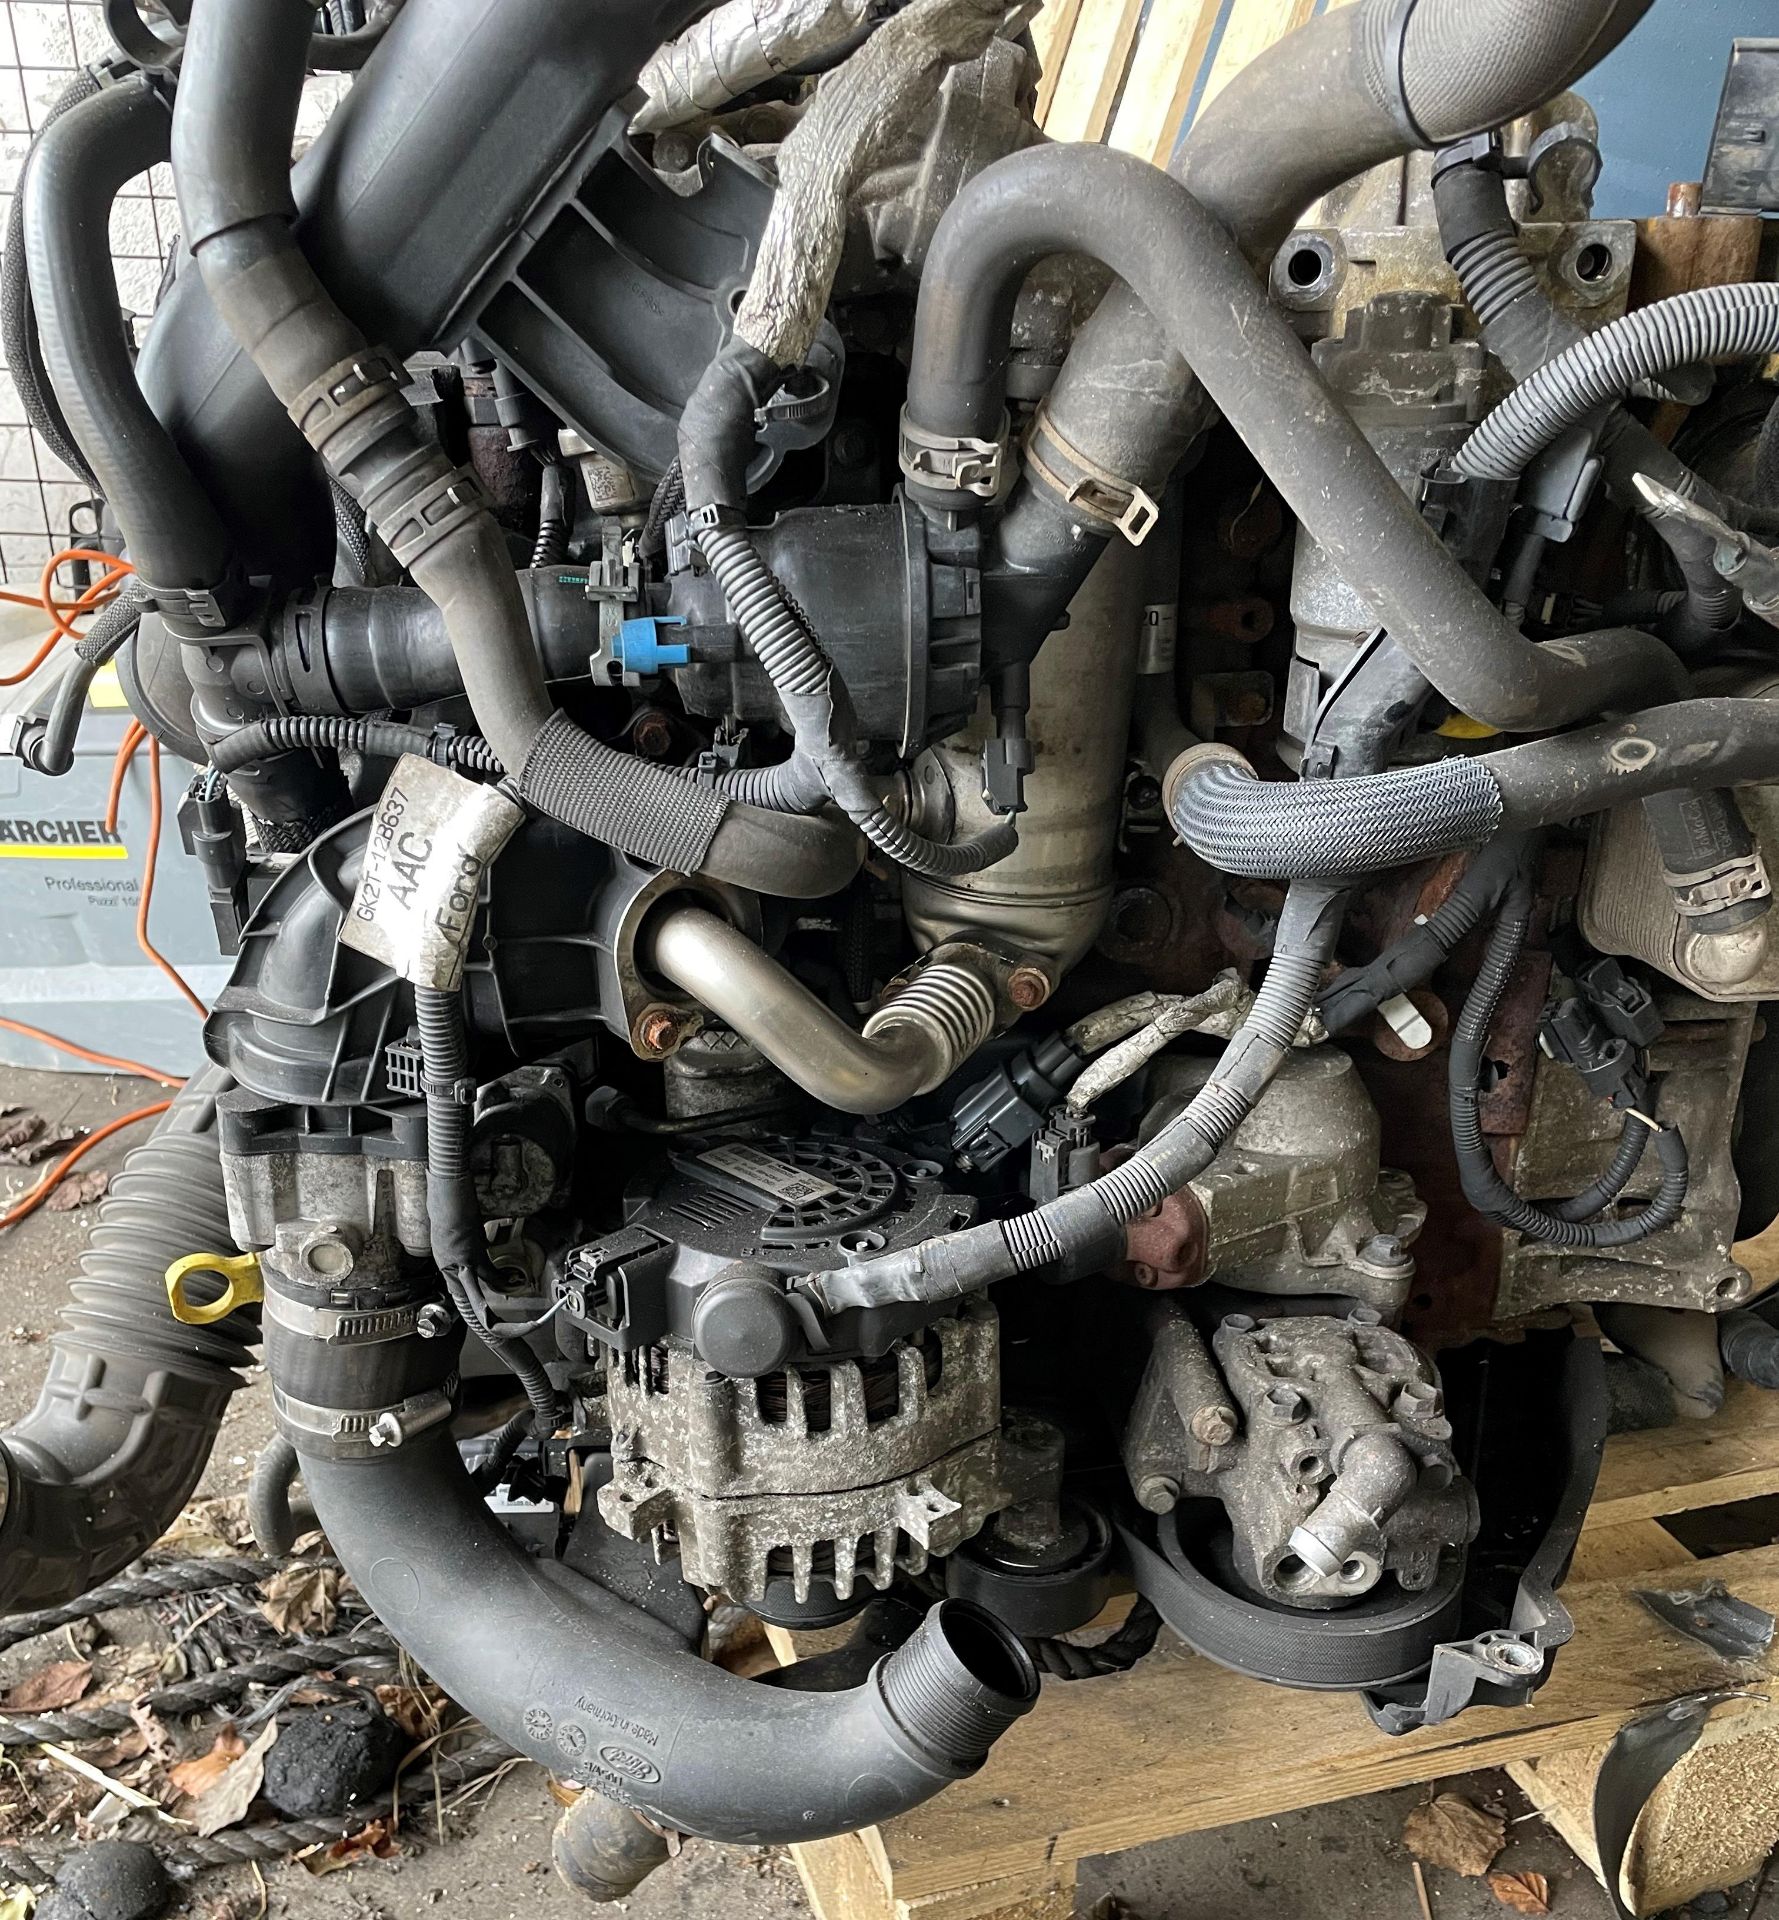 2018 Ford Transit engine (sold as seen - hairline crack to cylinder head)(Collection from TOWN END - Image 4 of 7